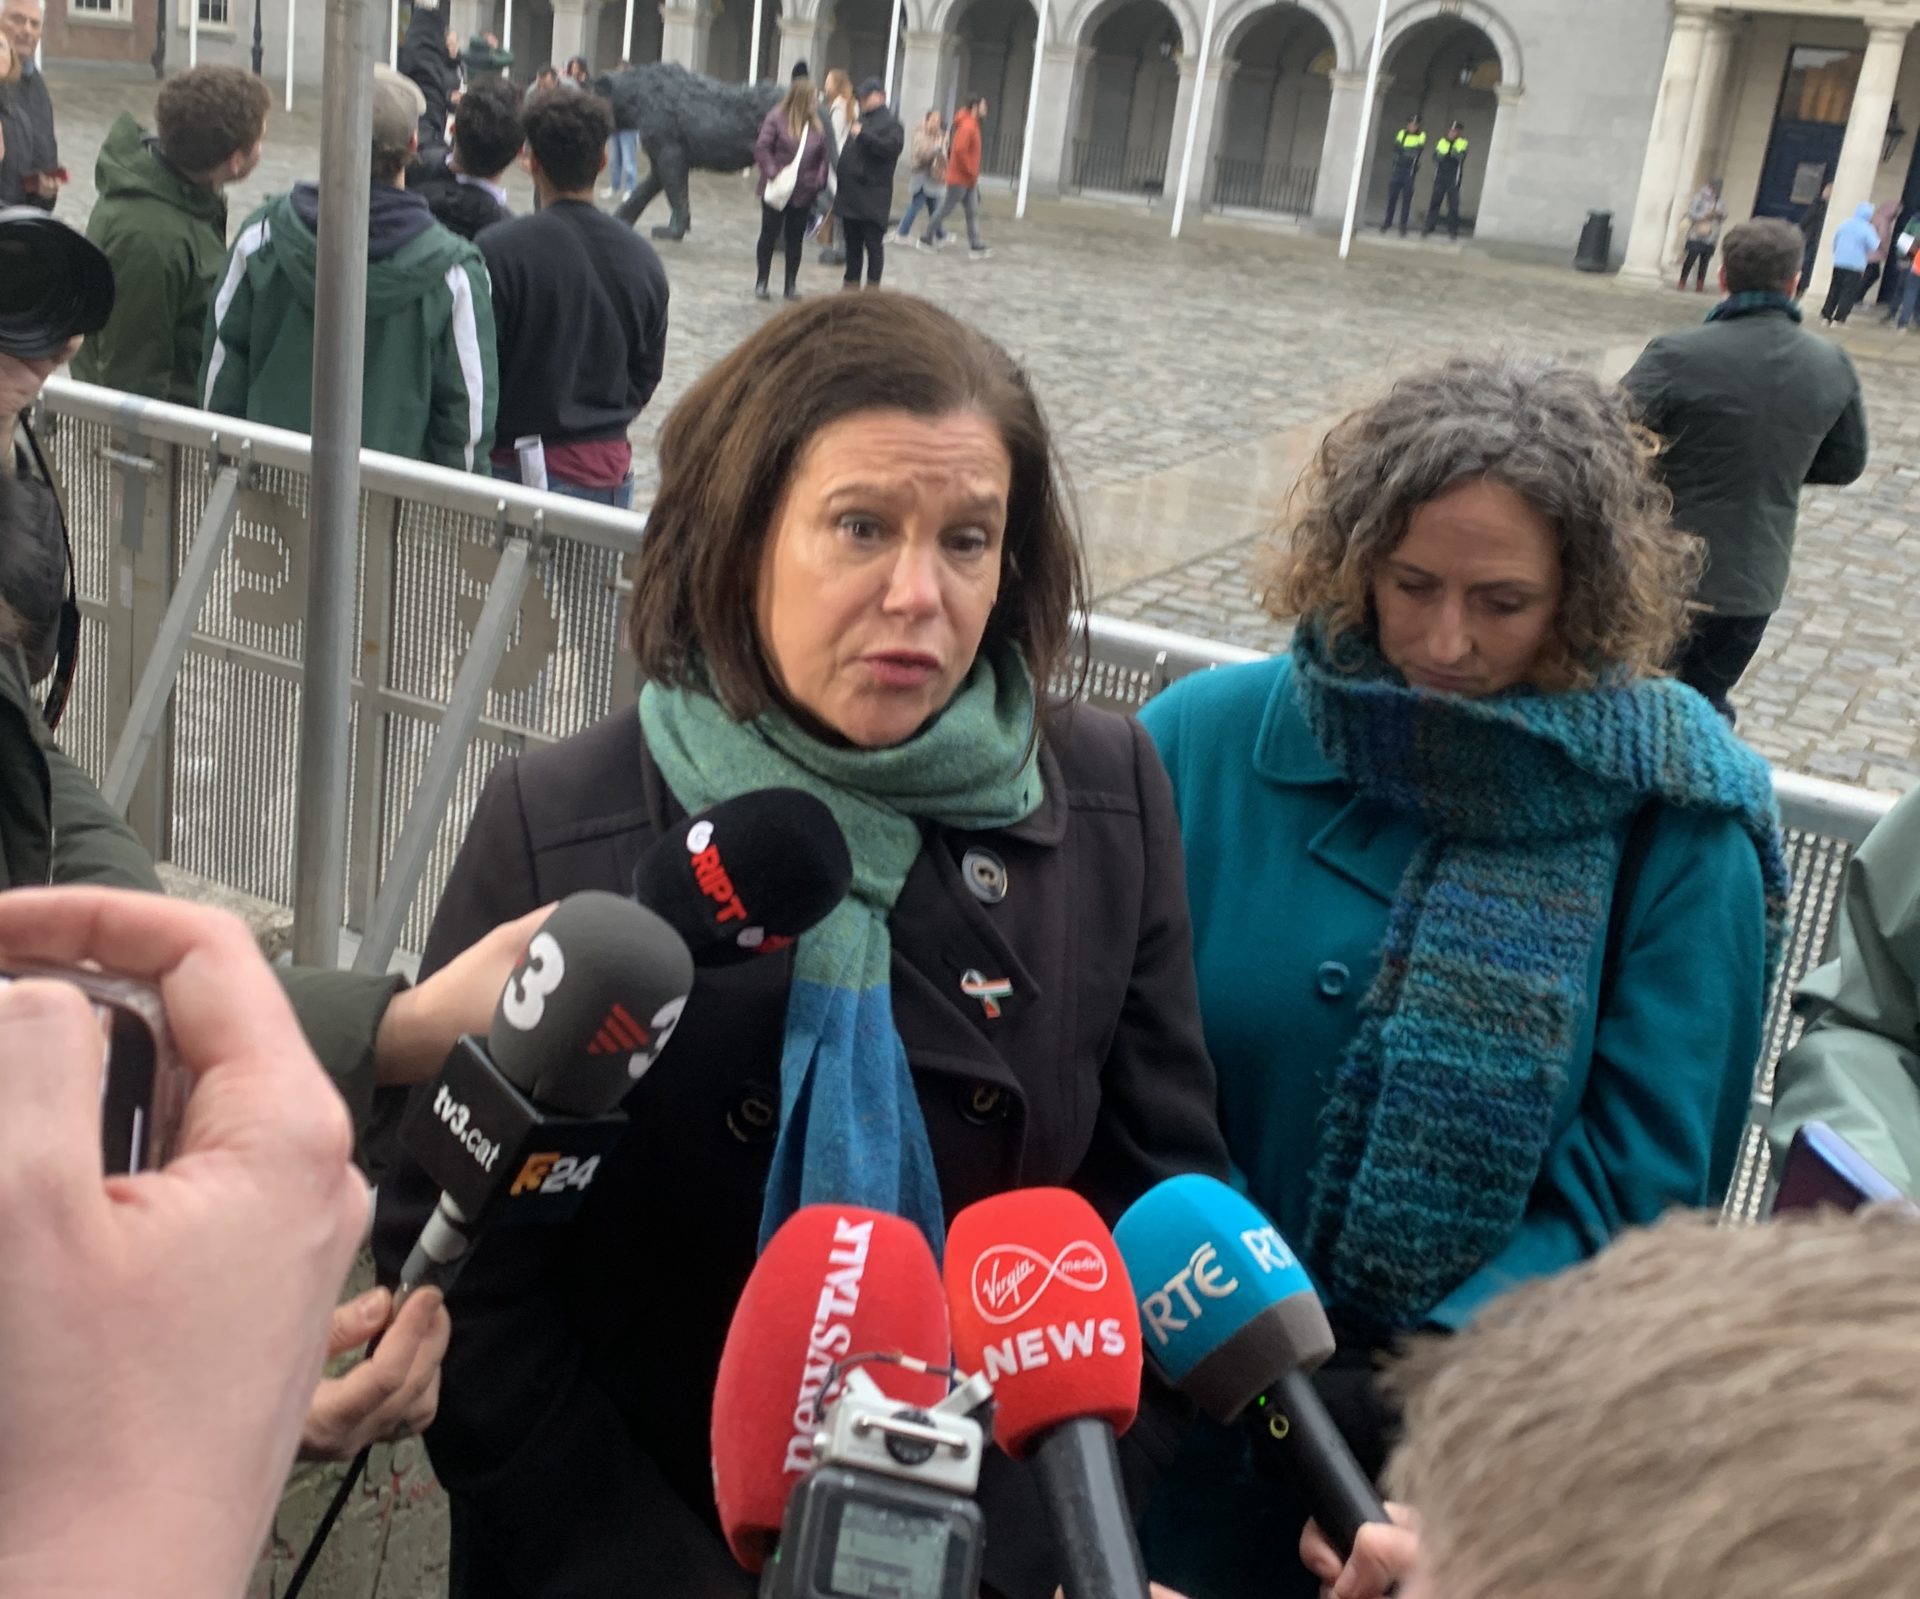 Sinn Féin leader Mary Lou McDonald speaking to the media during the count of the Family and Care Referendums at Dublin's RDS, 9-3-24. 